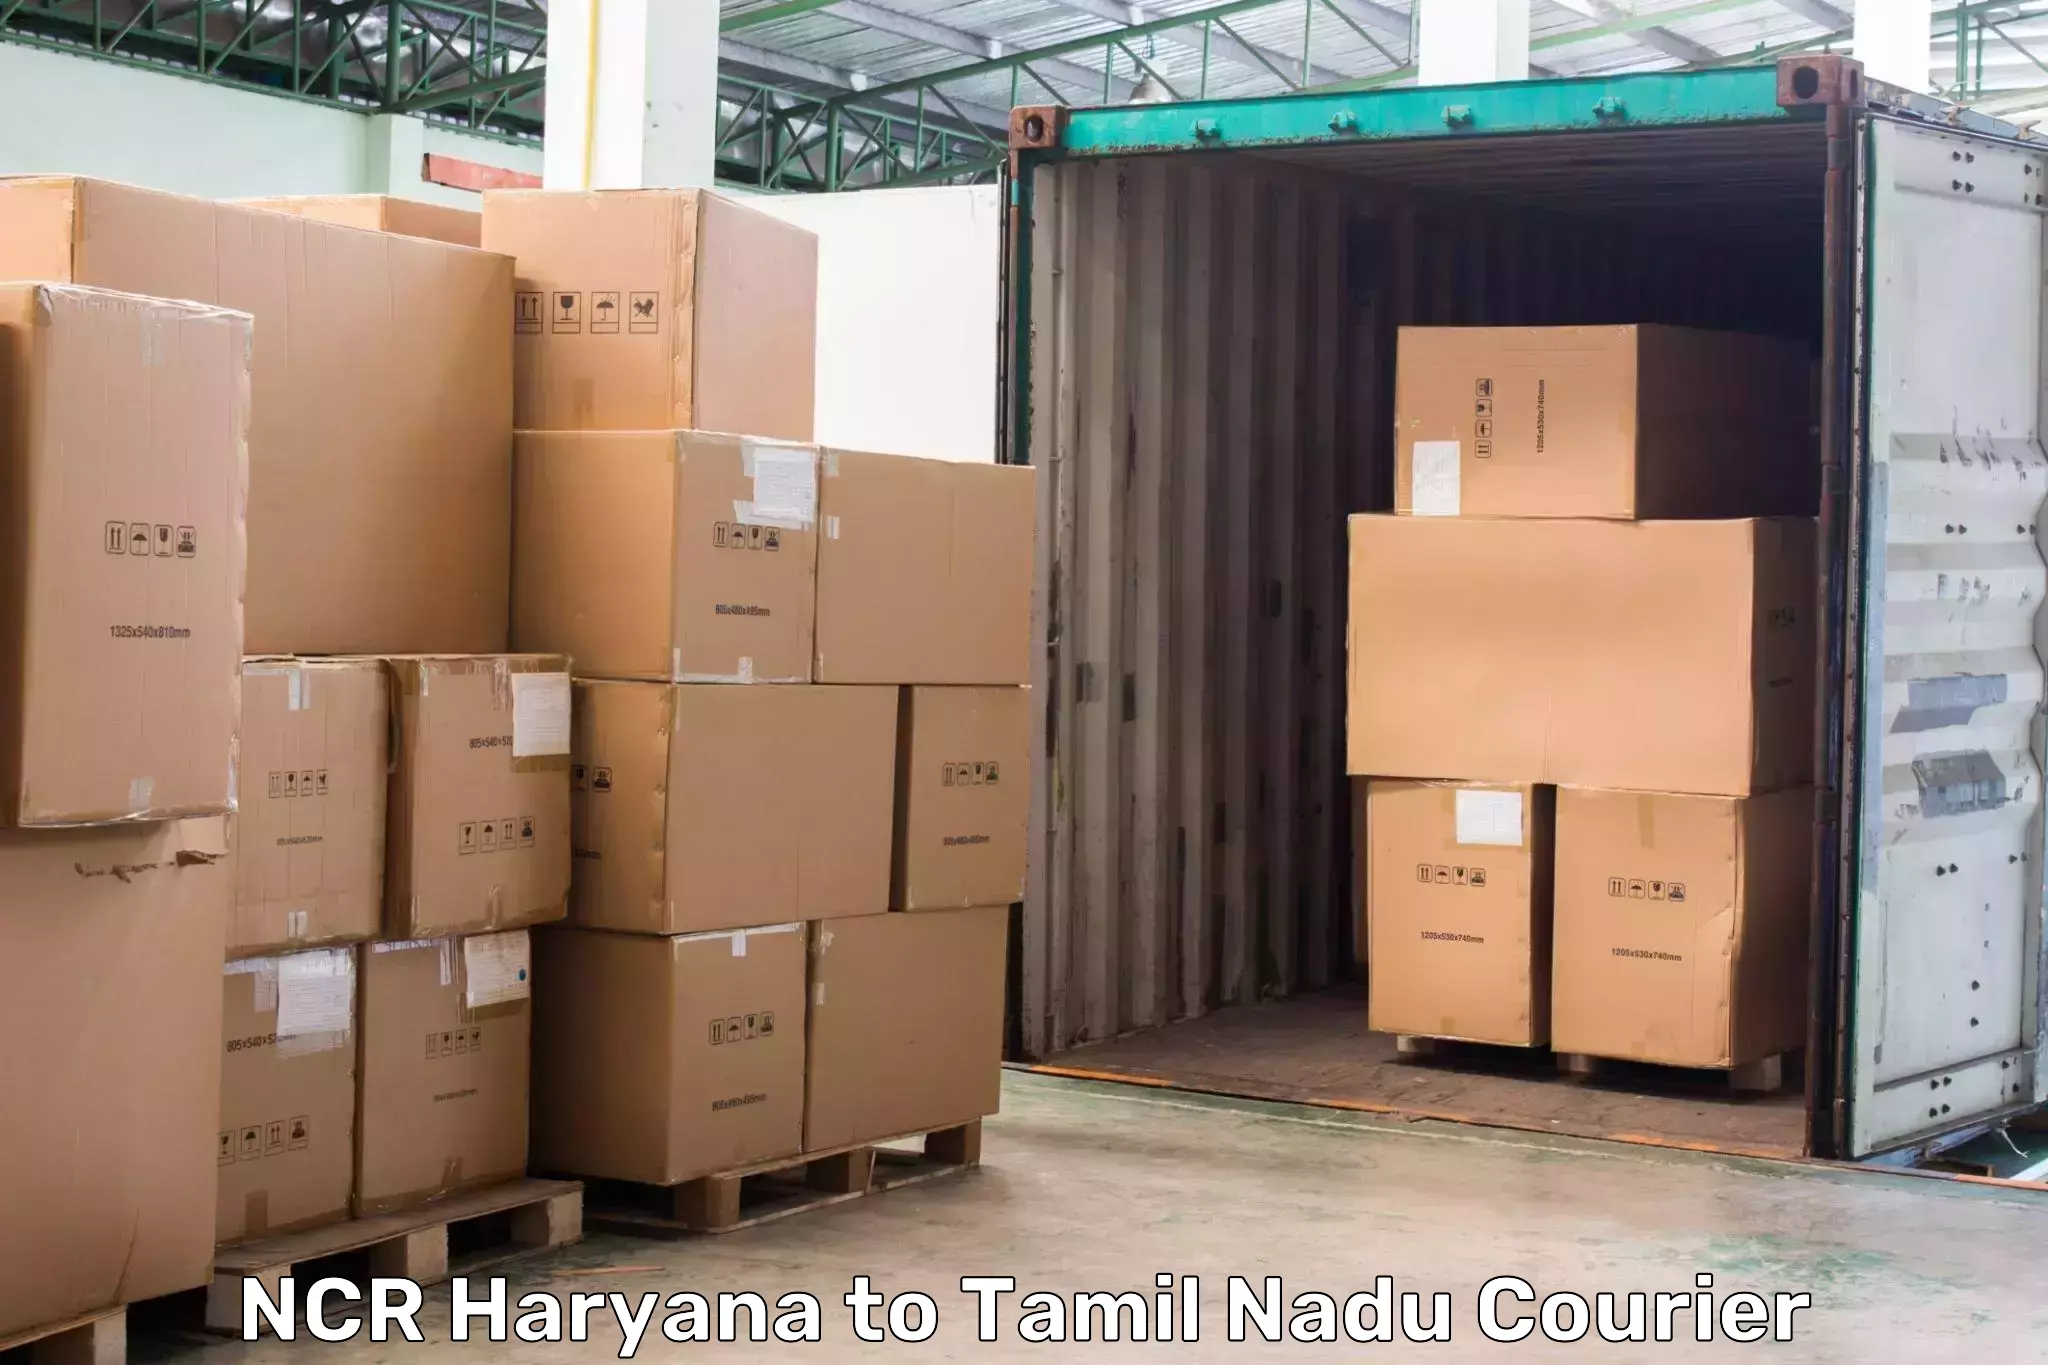 Overnight delivery services NCR Haryana to Bharathiar University Coimbatore